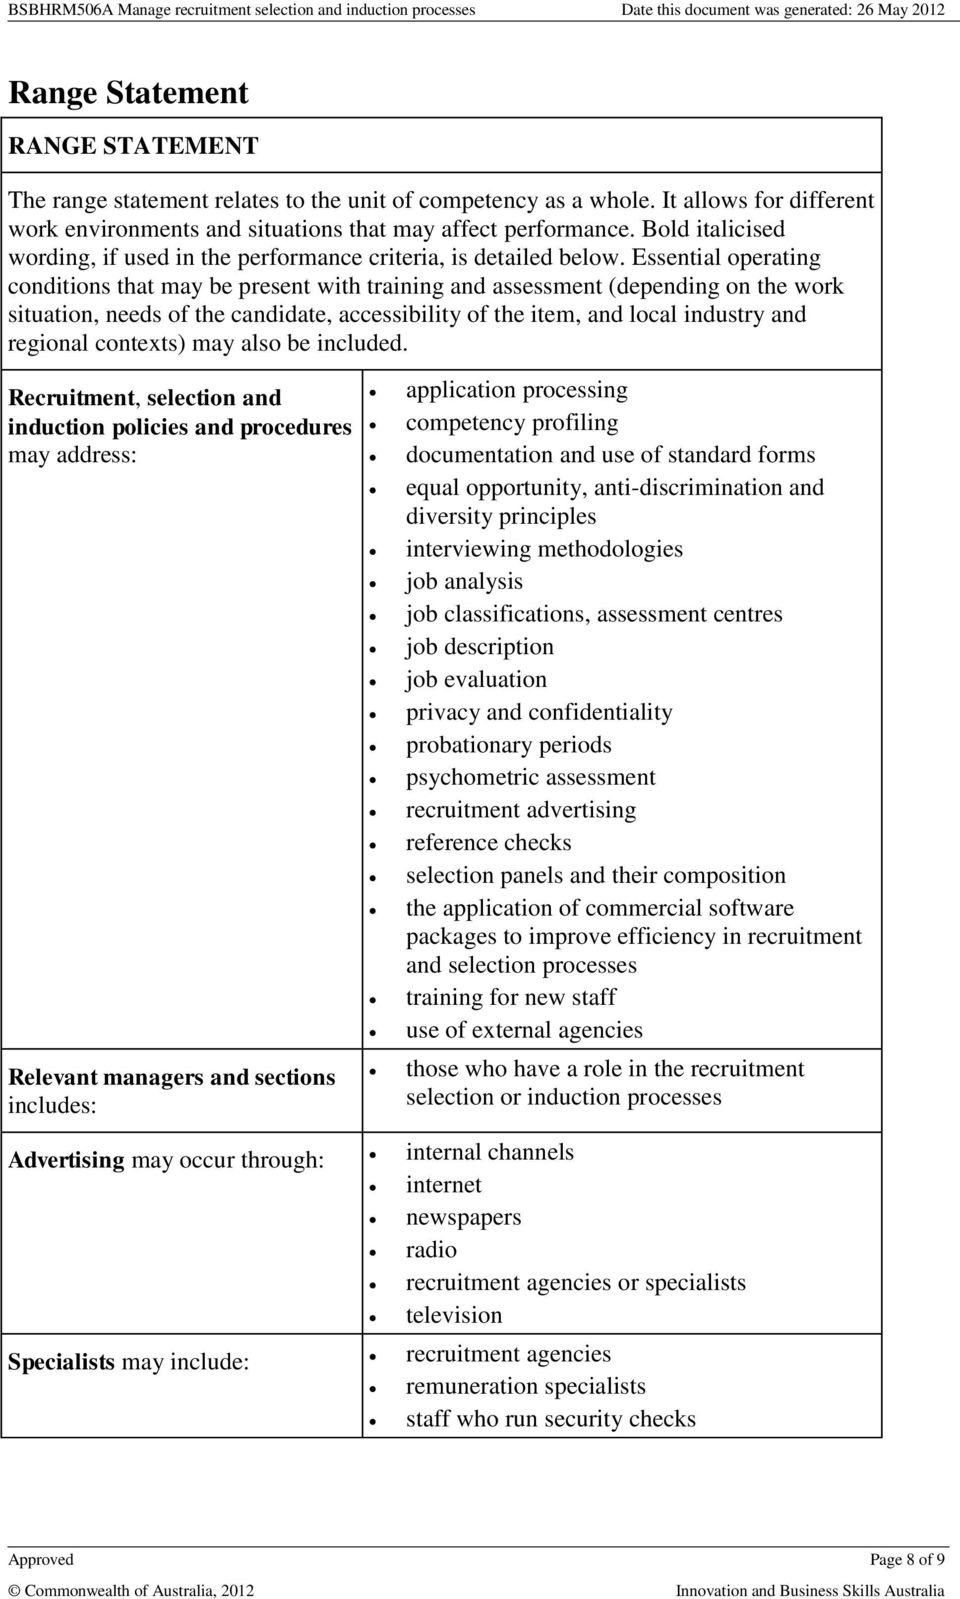 Essential operating conditions that may be present with training and assessment (depending on the work situation, needs of the candidate, accessibility of the item, and local industry and regional